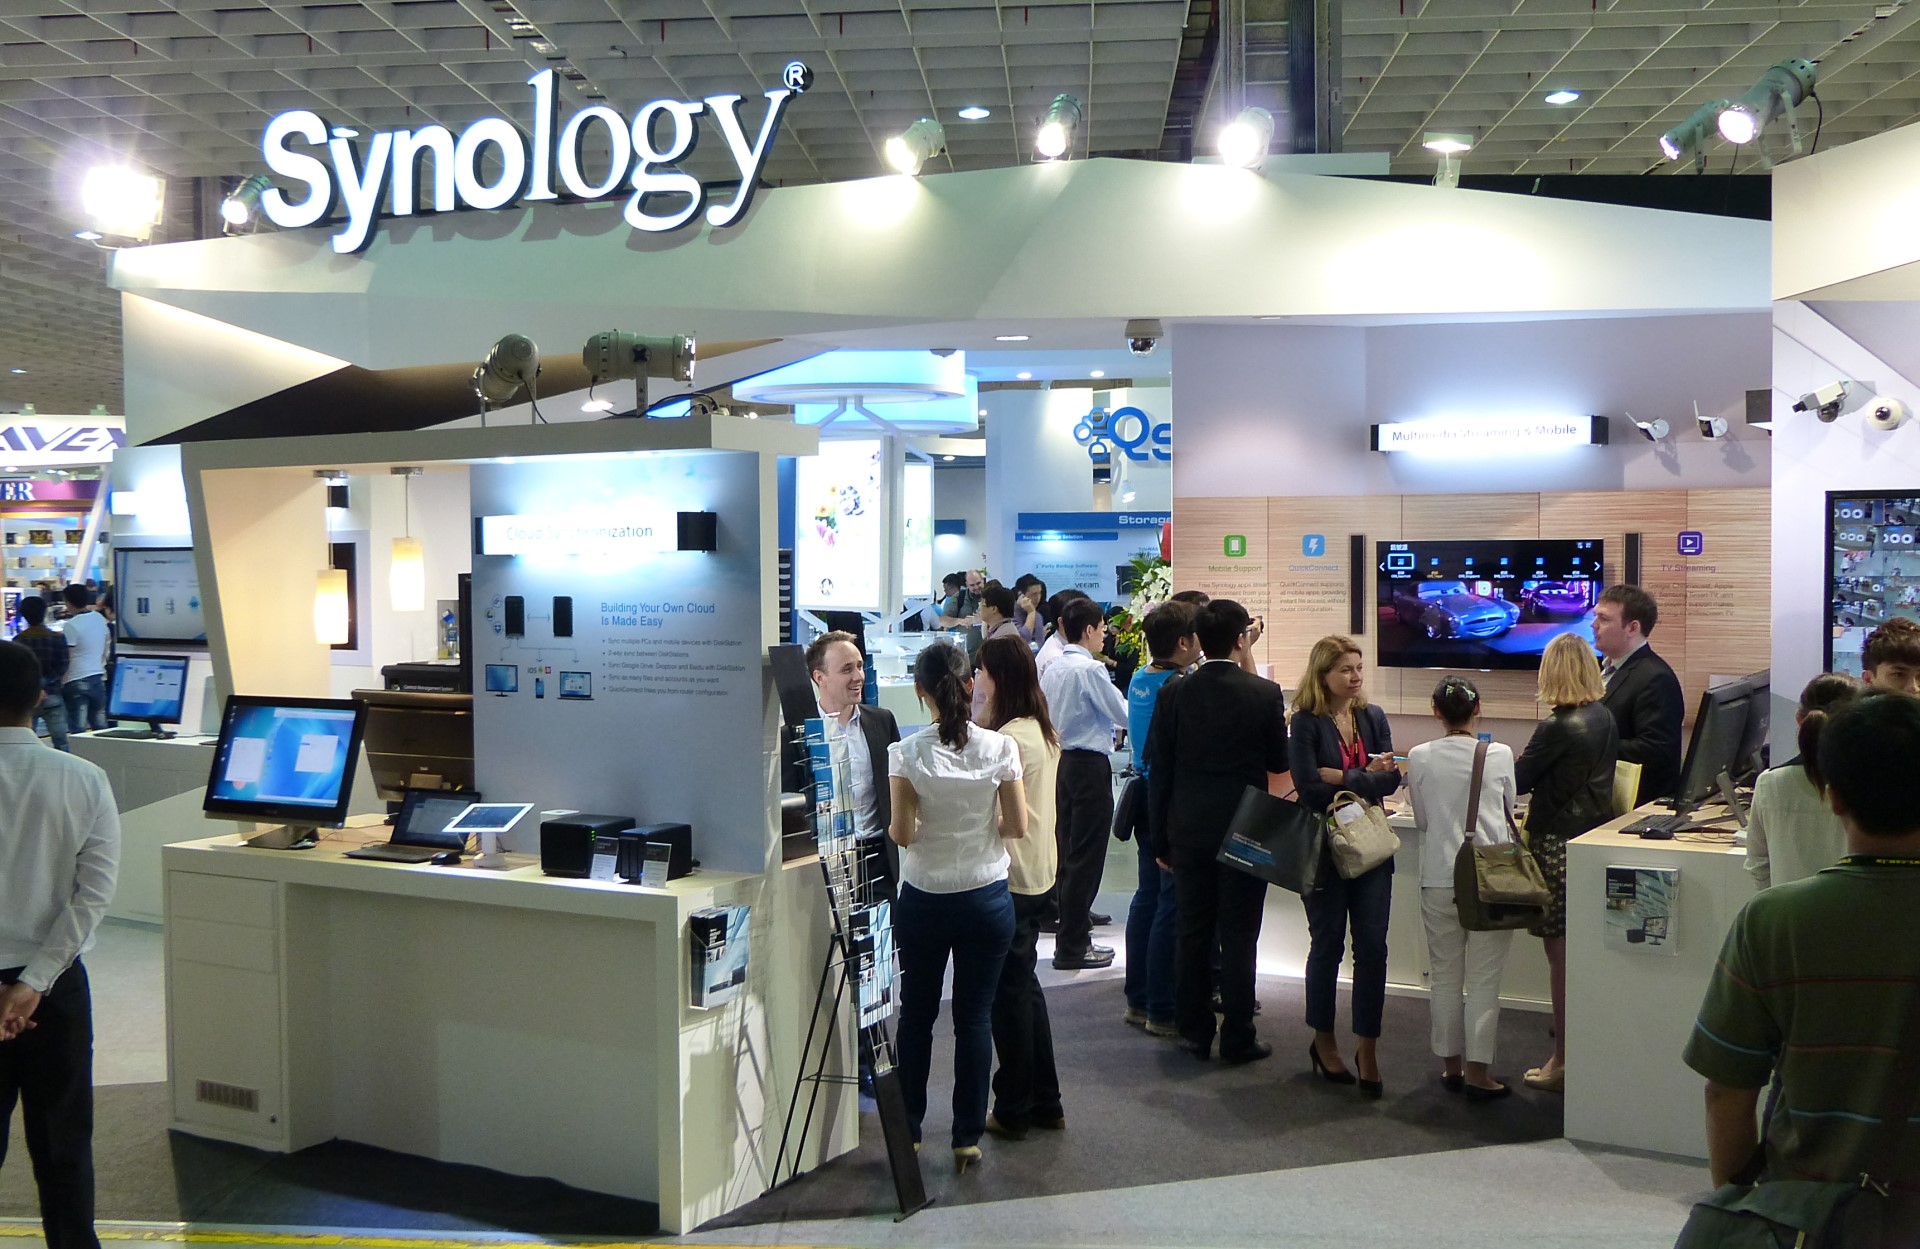 Synology 新品發表：DS414slim、DS215air、DS415play 隆重推出